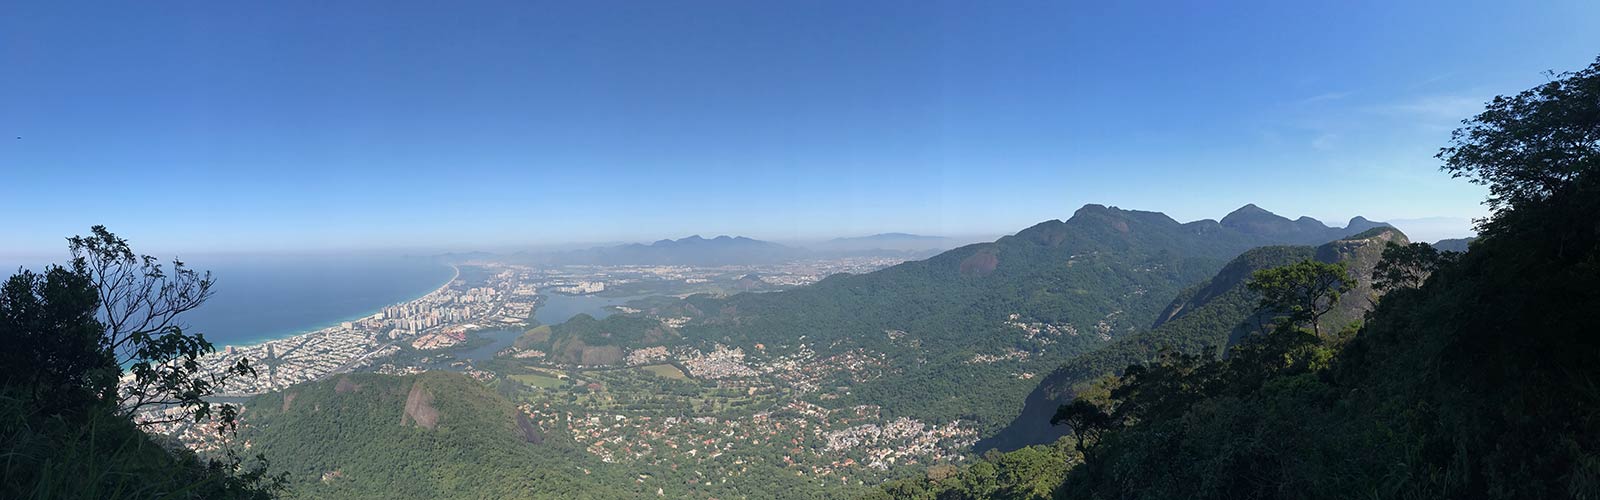 View from the top of the mountain in Gavea, Brazil. Climbing the wrong mountain, the best mistake I've made